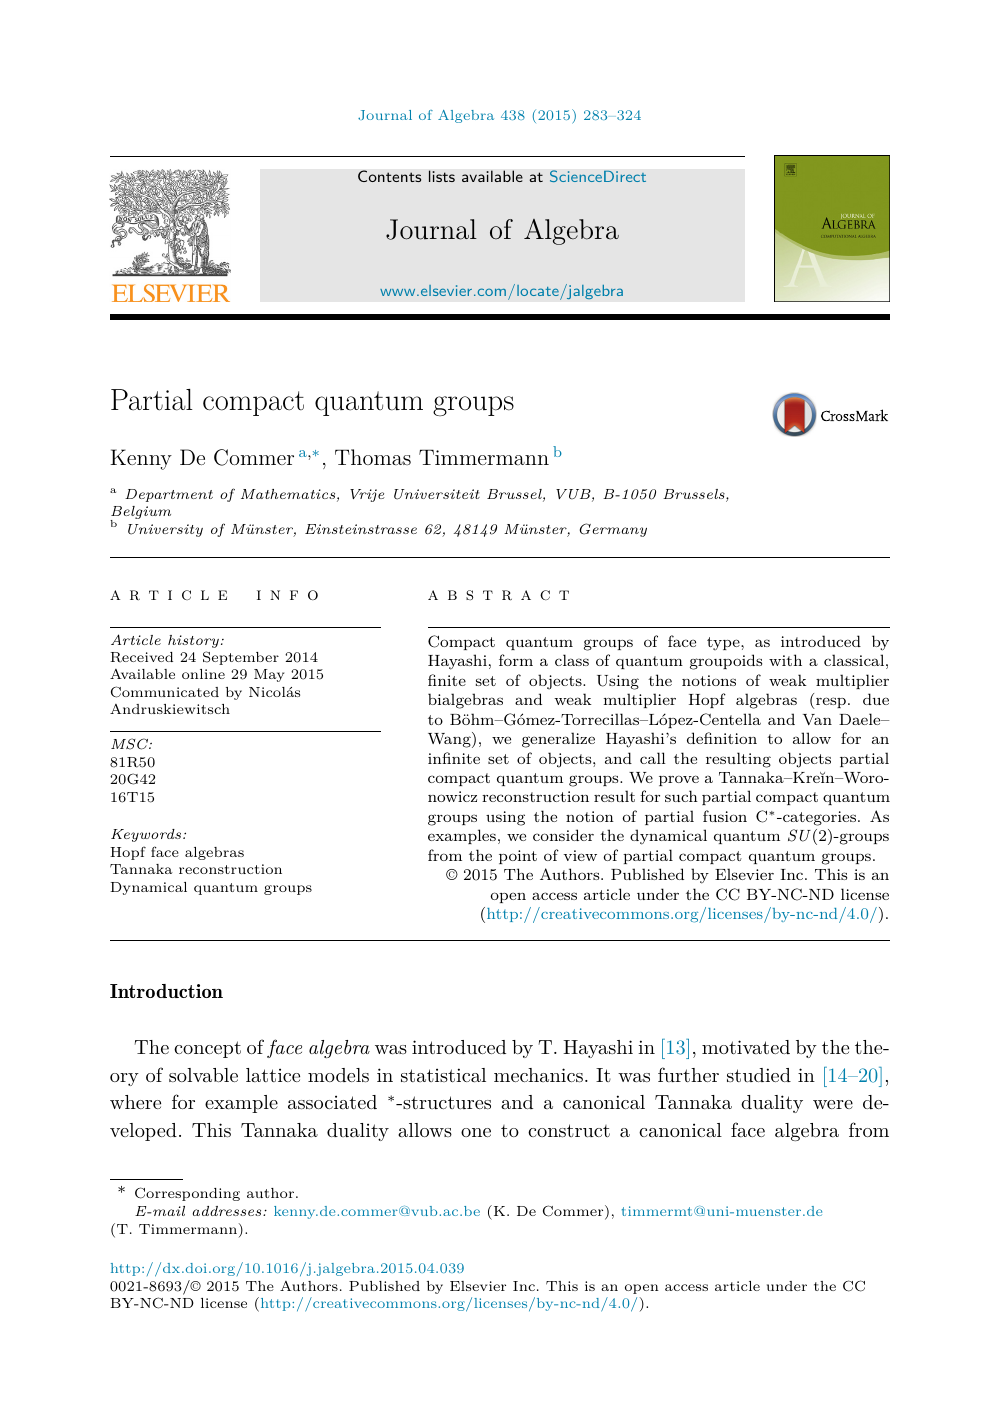 Partial Compact Quantum Groups Topic Of Research Paper In Mathematics Download Scholarly Article Pdf And Read For Free On Cyberleninka Open Science Hub